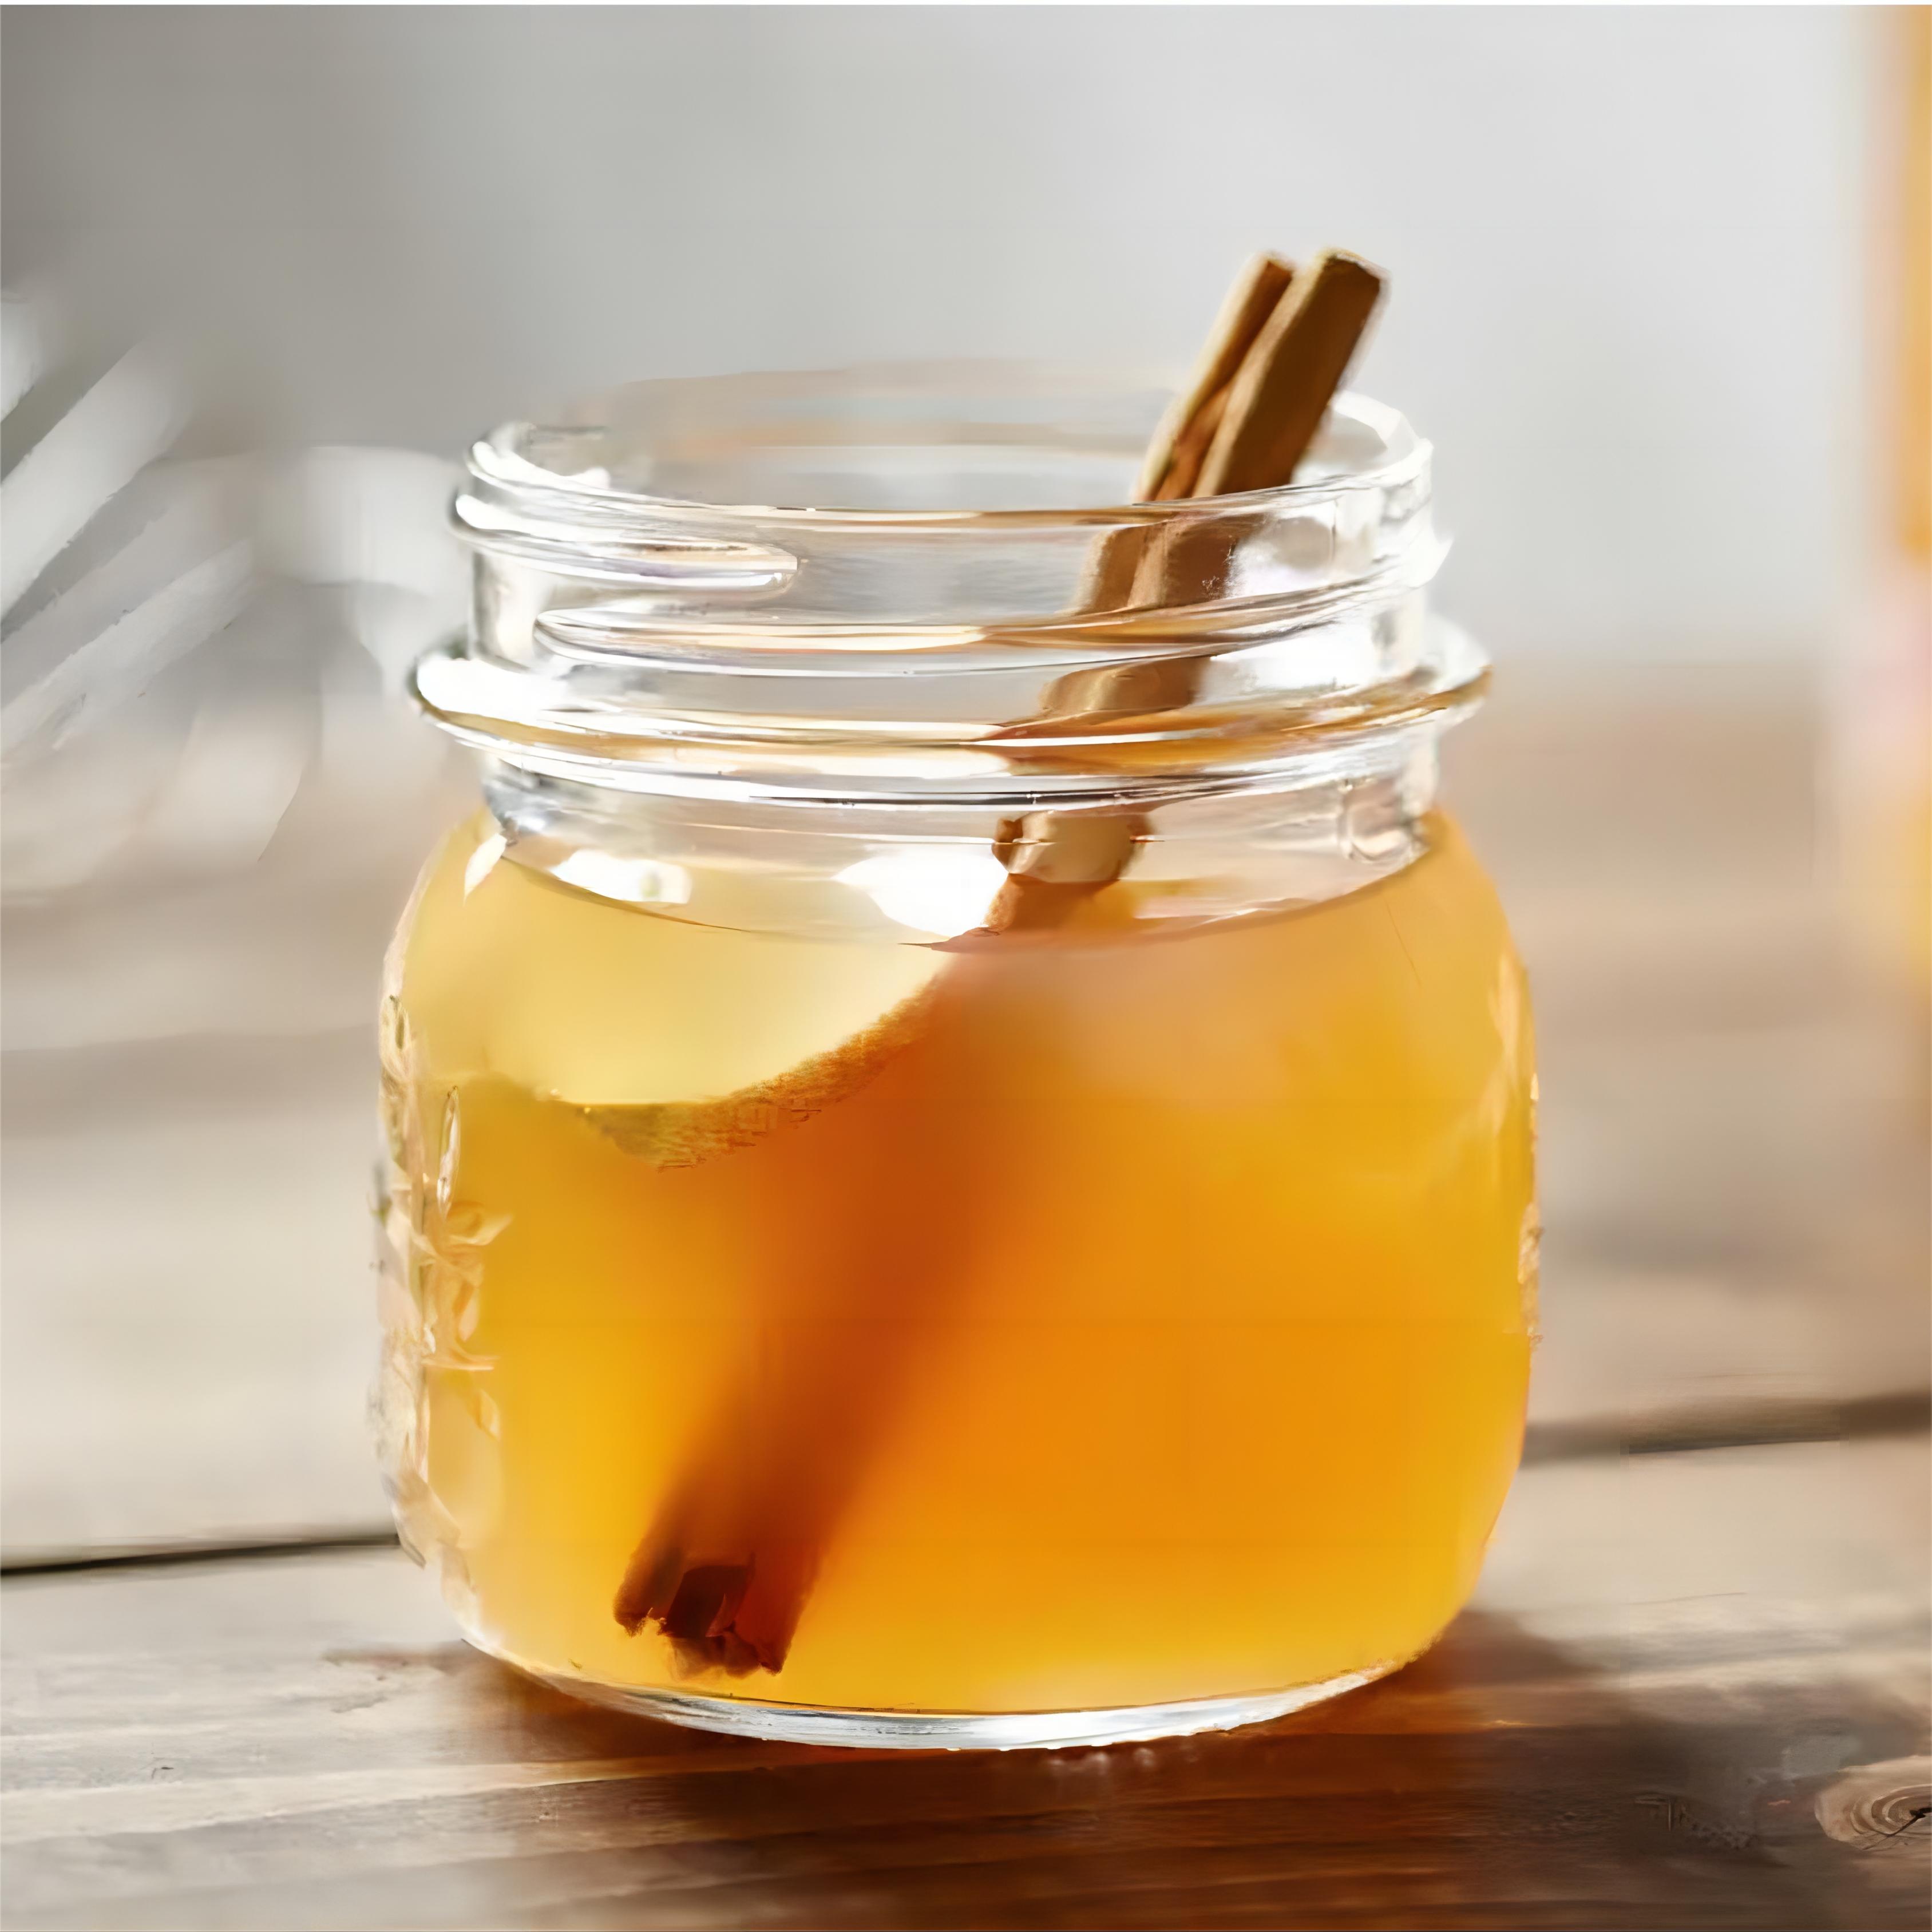 Can Apple Cider Vinegar Help You Lose Weight?